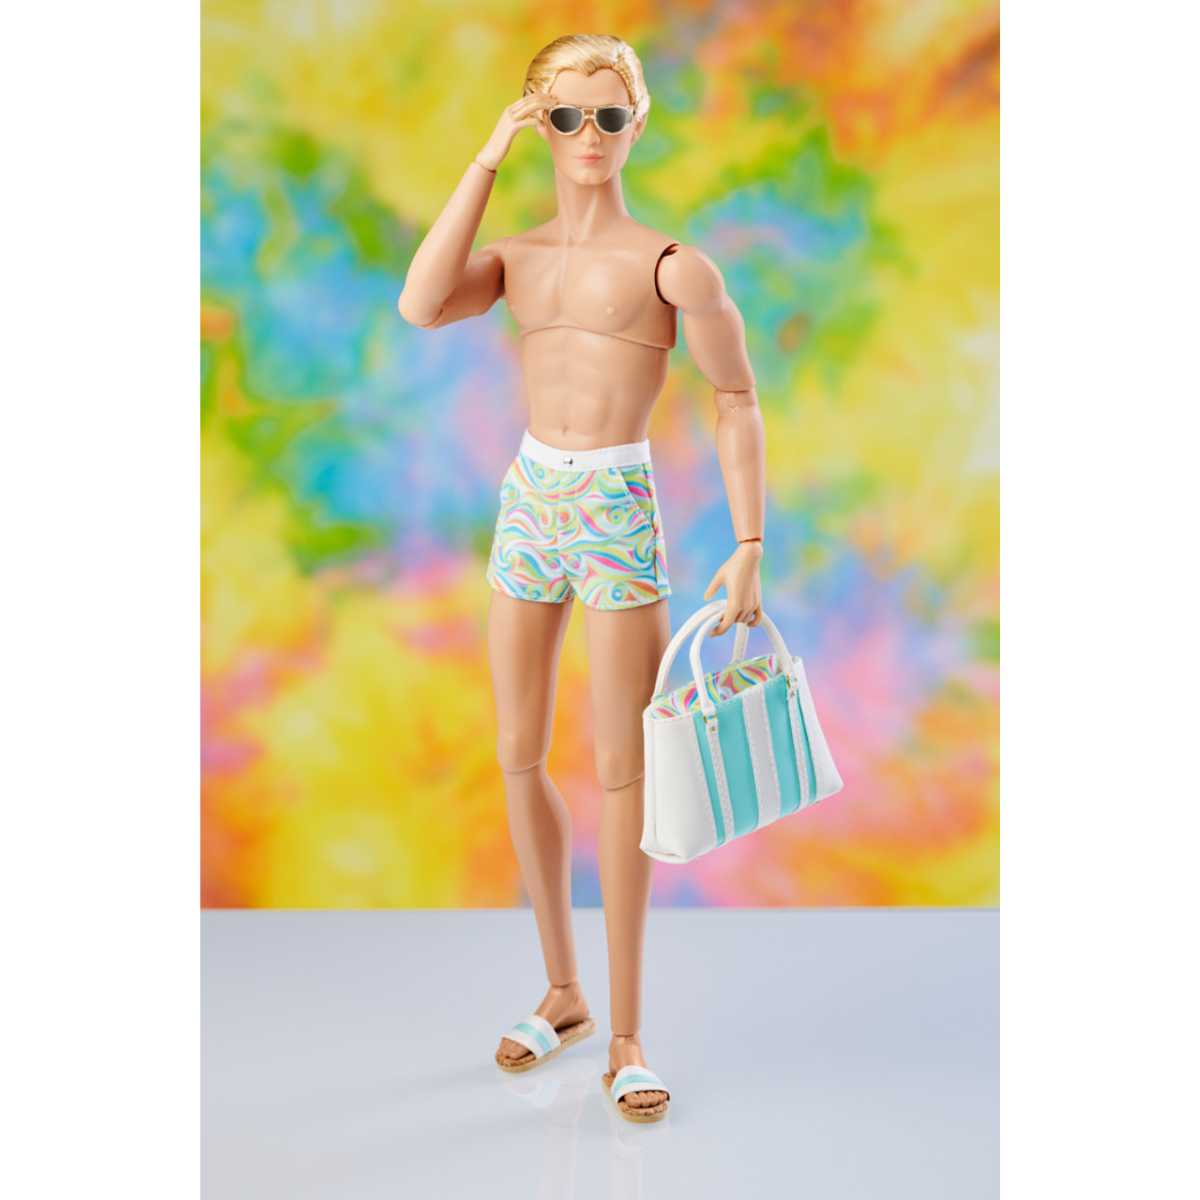 Integrity Toys Poolside Paramour Sergio Silva Doll - Poppy Parker - Simon's Collectibles